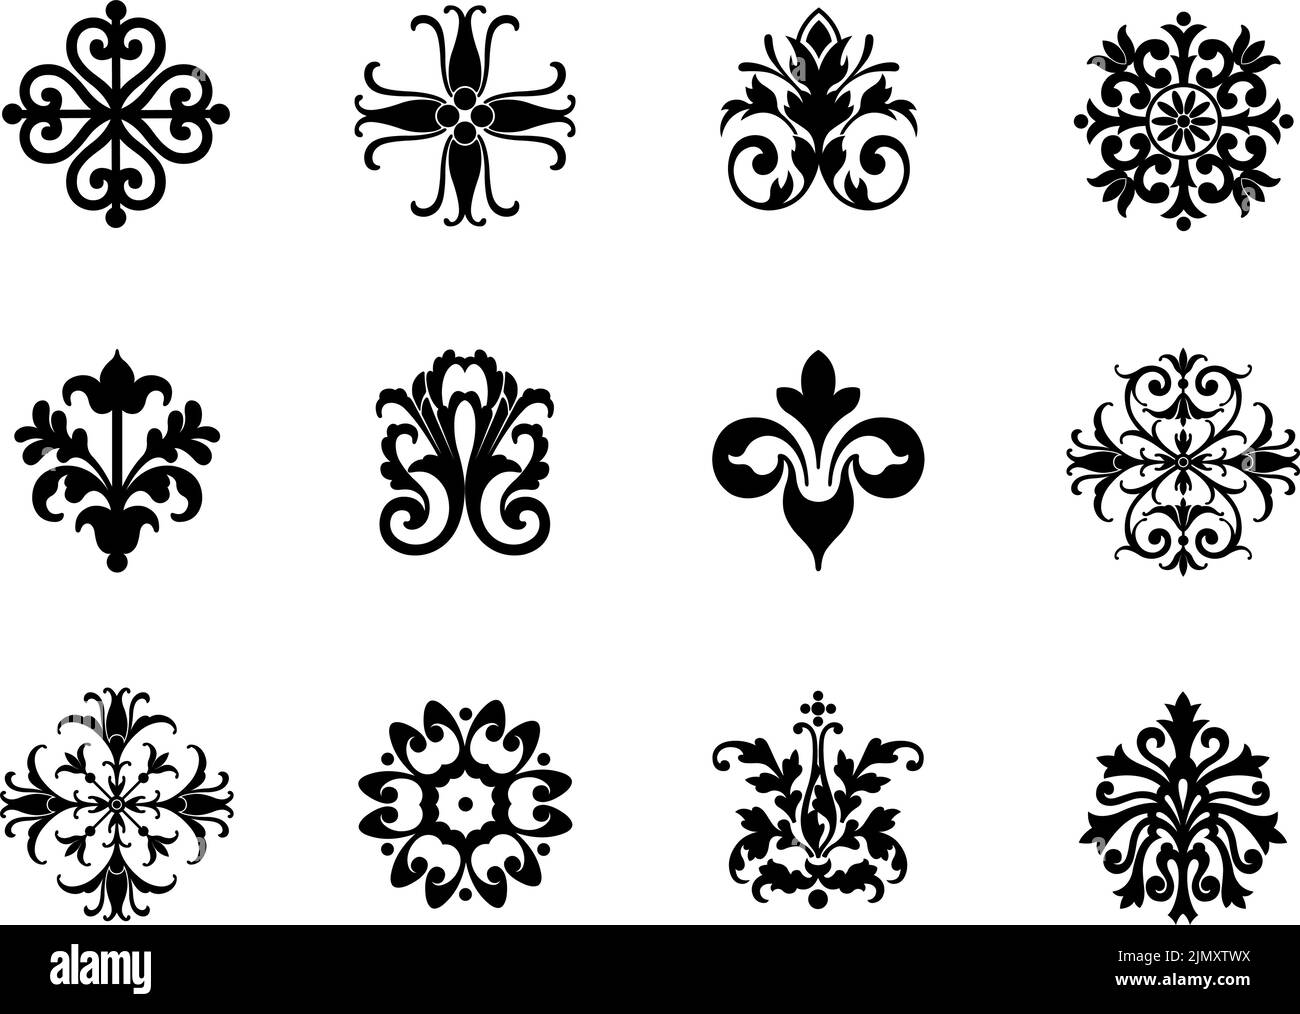 A set of vector vintage decorative ornamental floral icons and medallions. Stock Vector